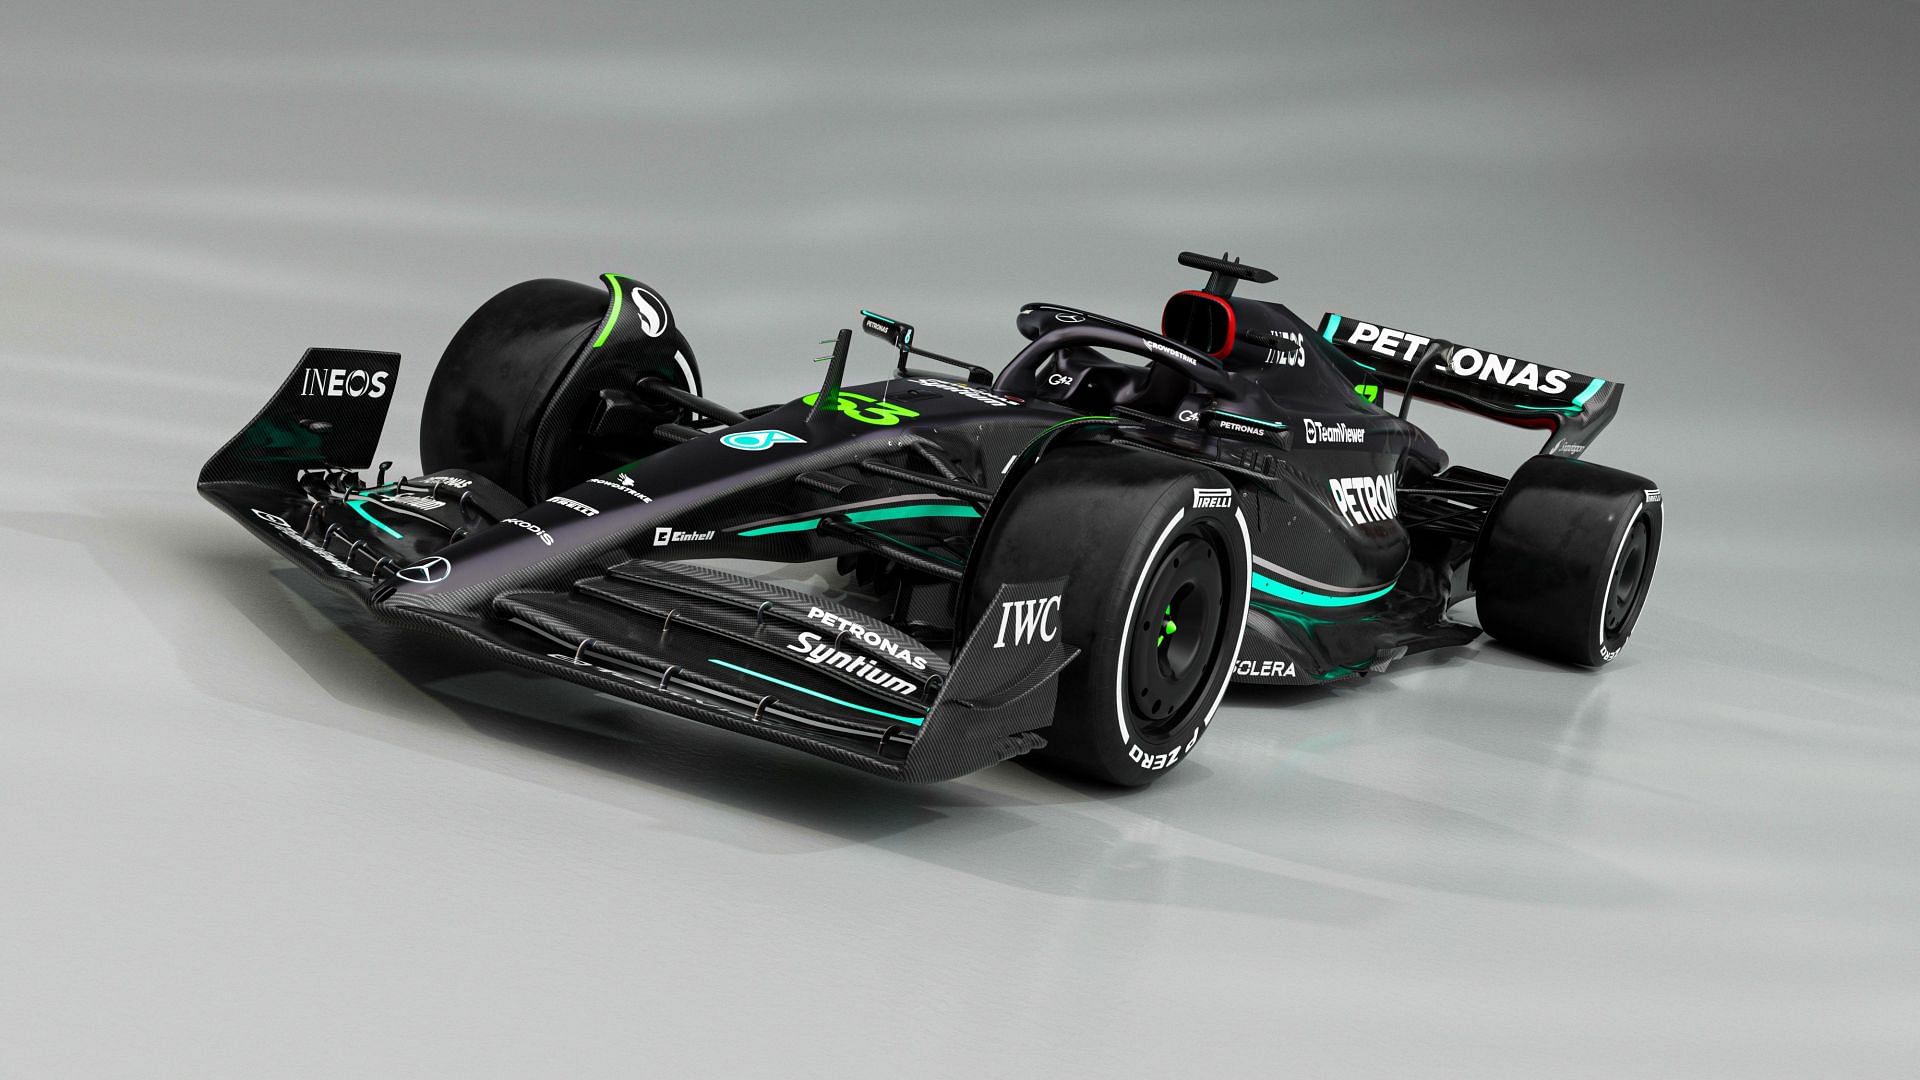 The Mercedes W14 (Image - Mercedes-AMG Petronas F1 Team on Twitter)